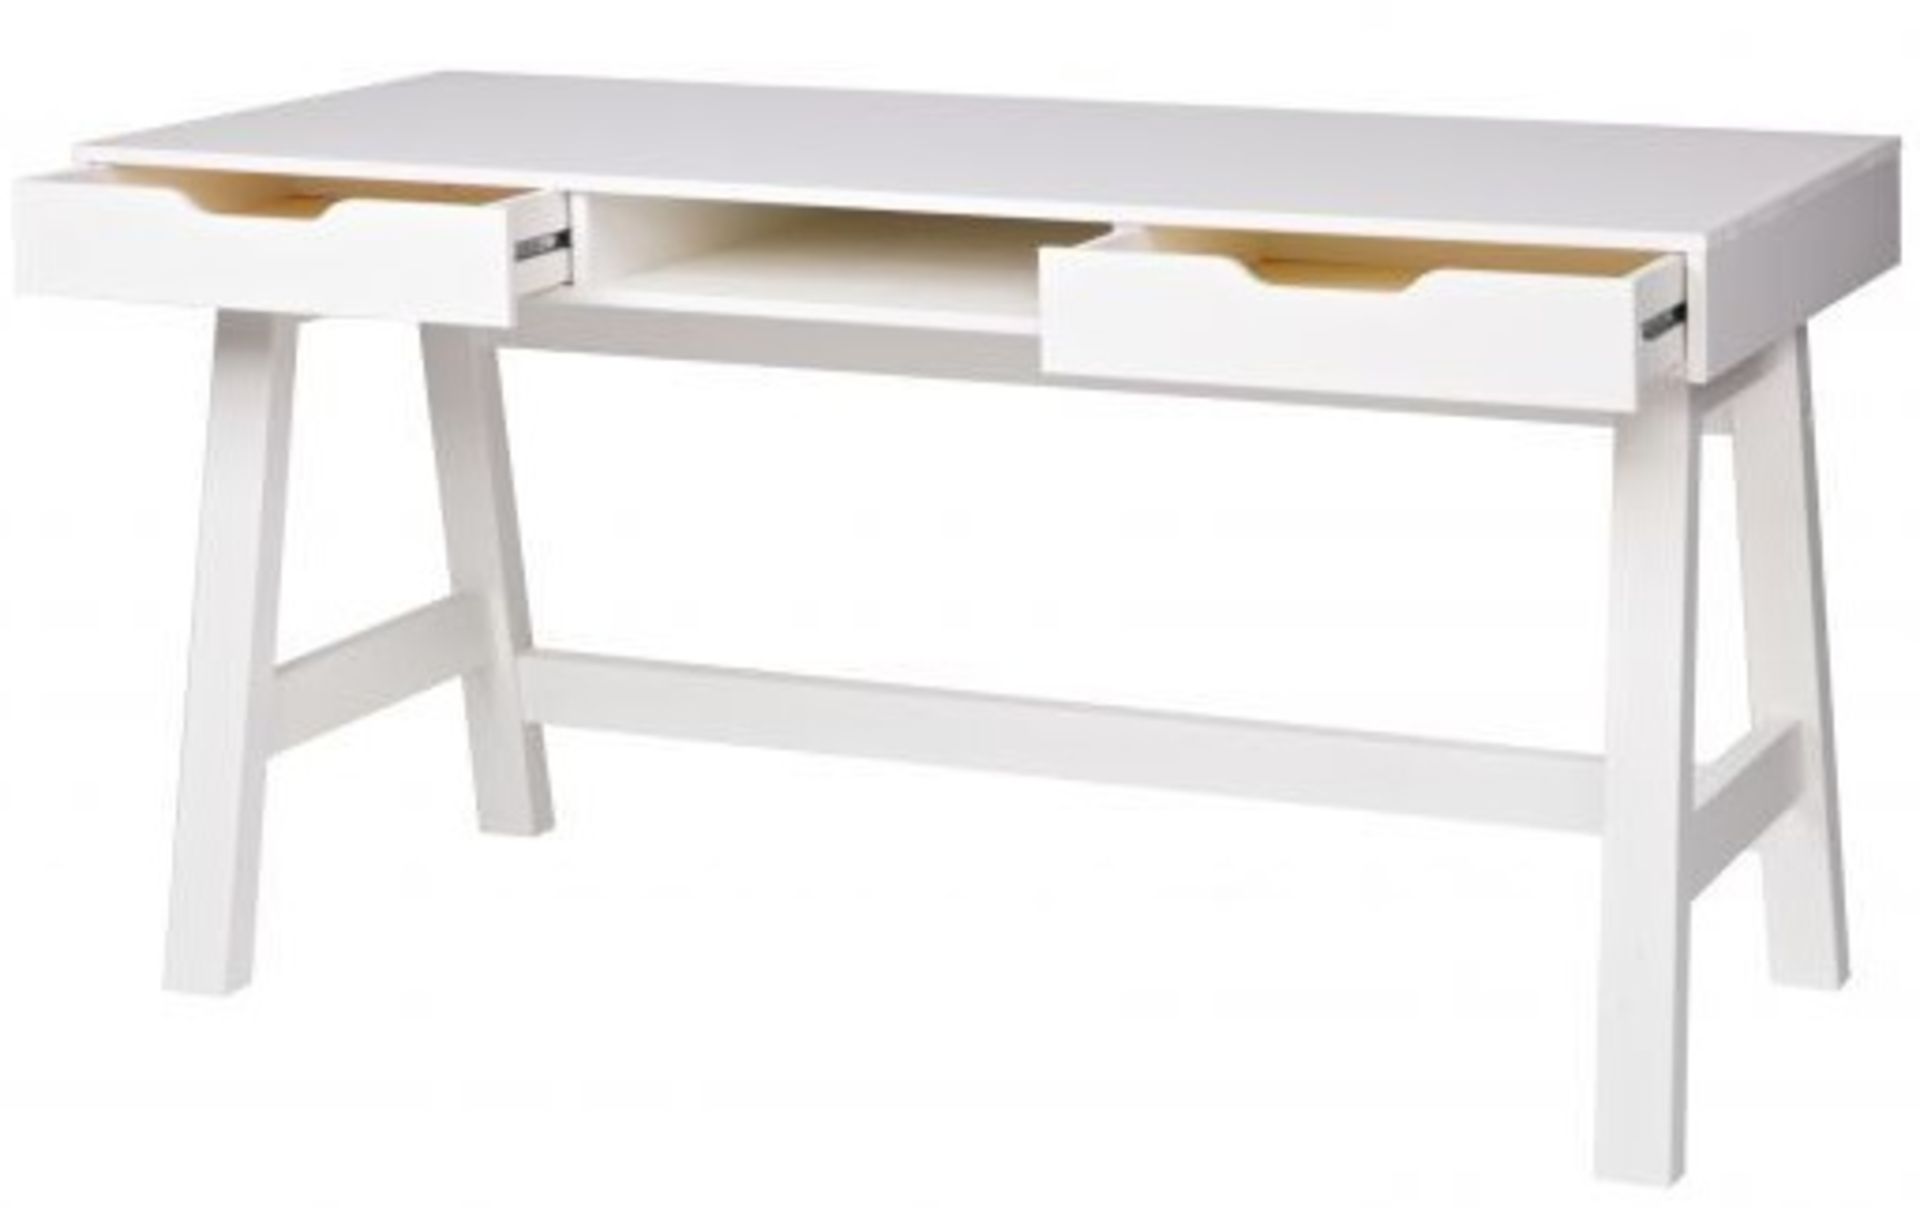 1 x WOOOD 'Nikki' Desk In White - Original Price £385.00 - Made In Holland - Sealed Boxed Stock - - Image 4 of 6